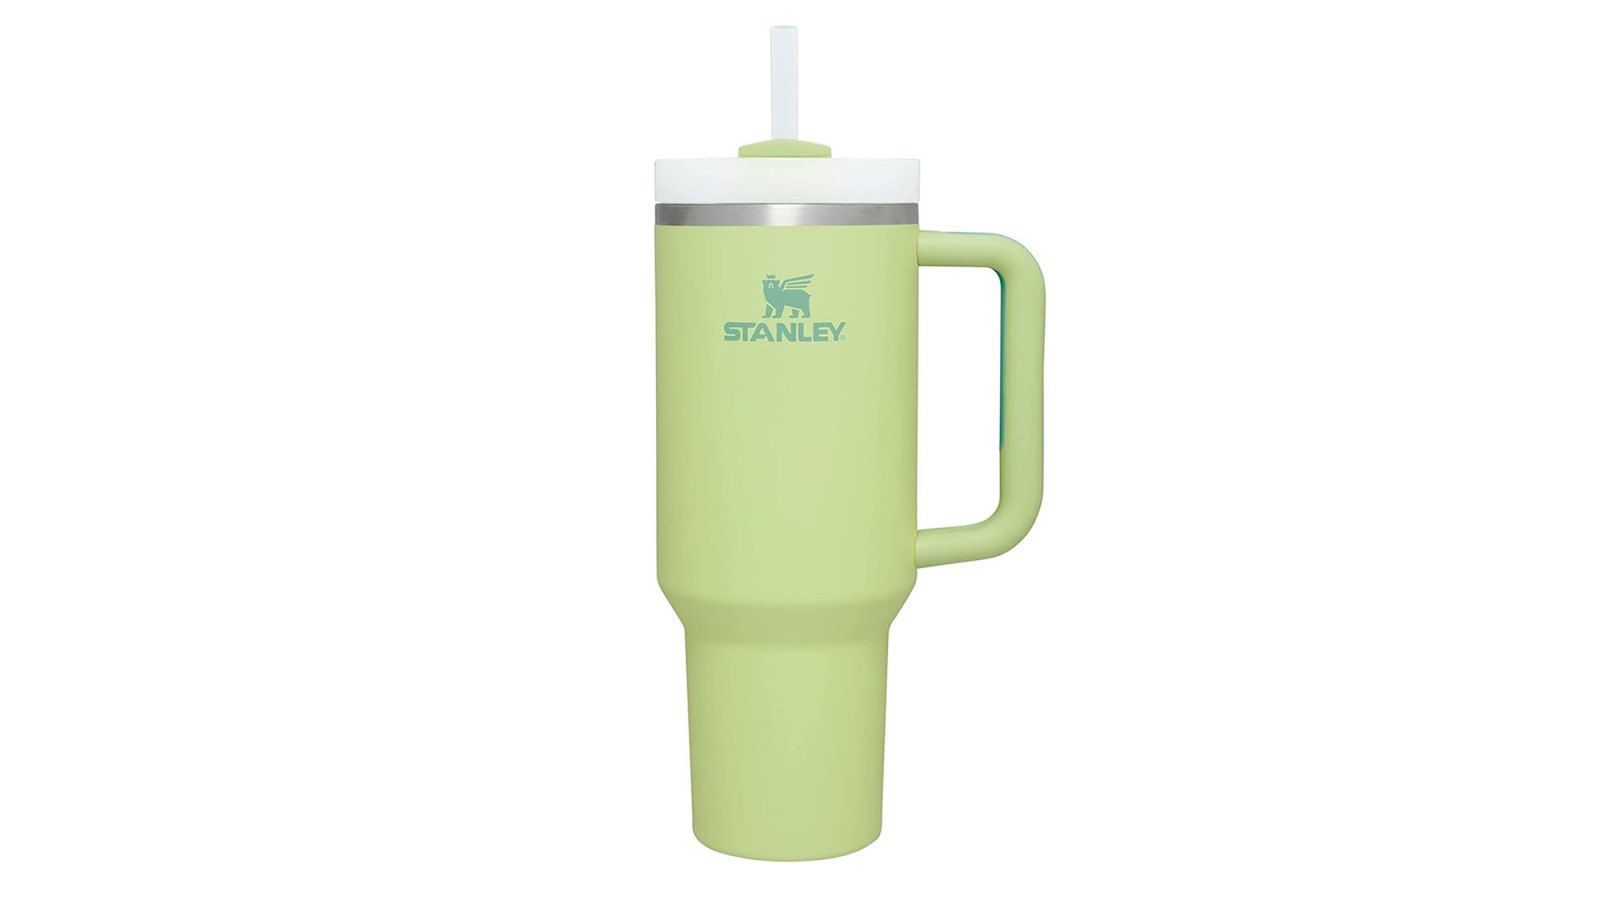 Stanley tumbler: The TikTok-famous drinkware is back in stock today